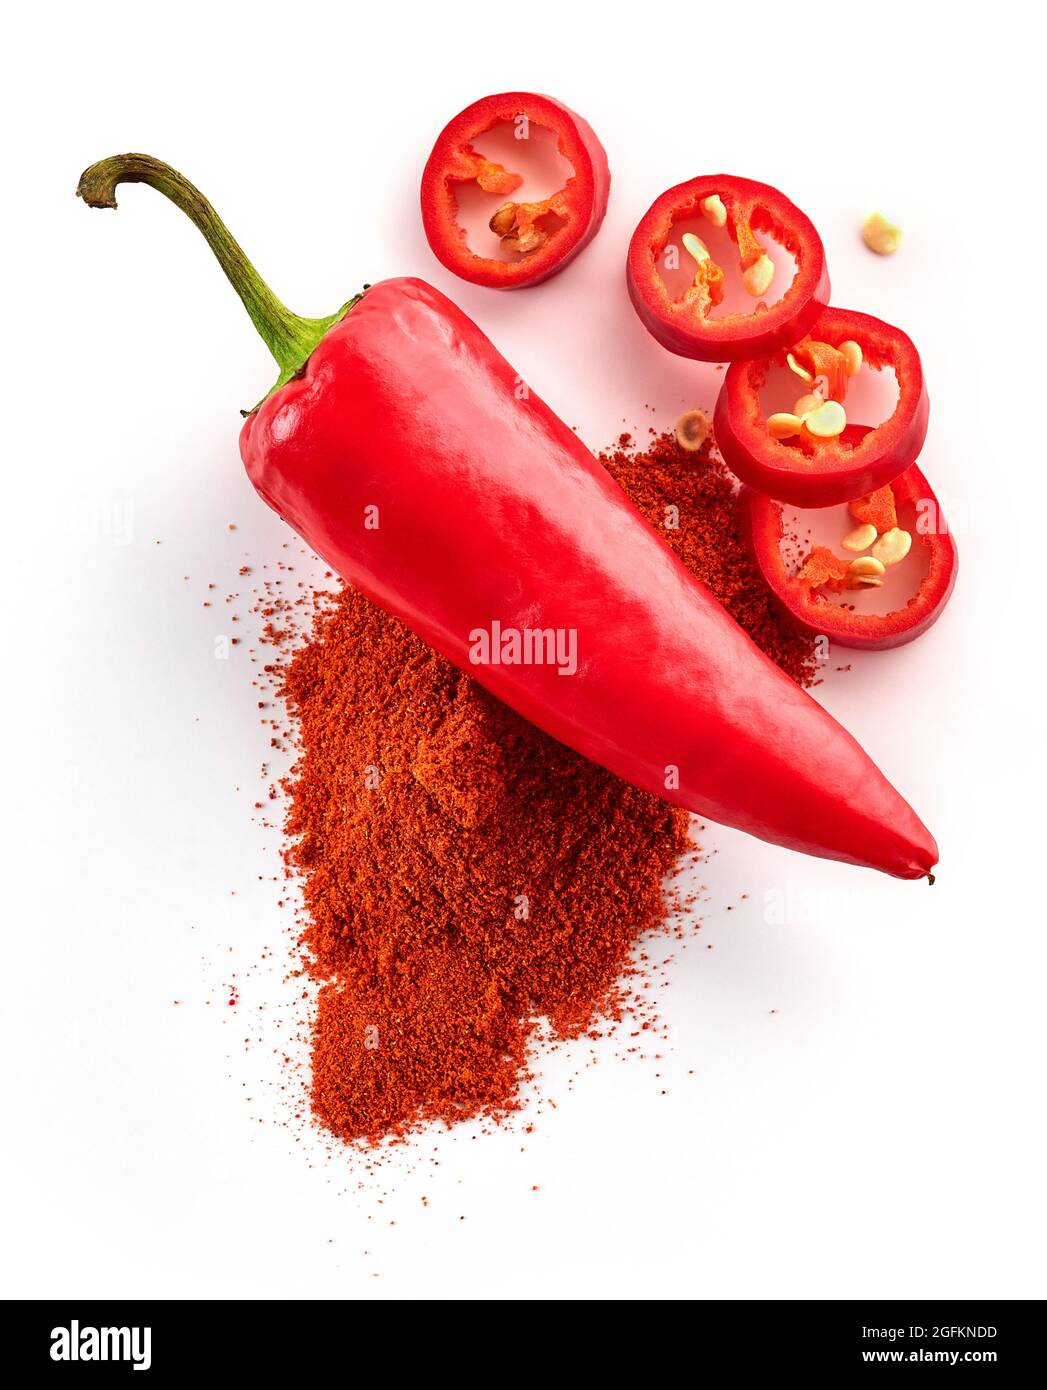 Paprika powder isolated on white background, top view Stock Photo